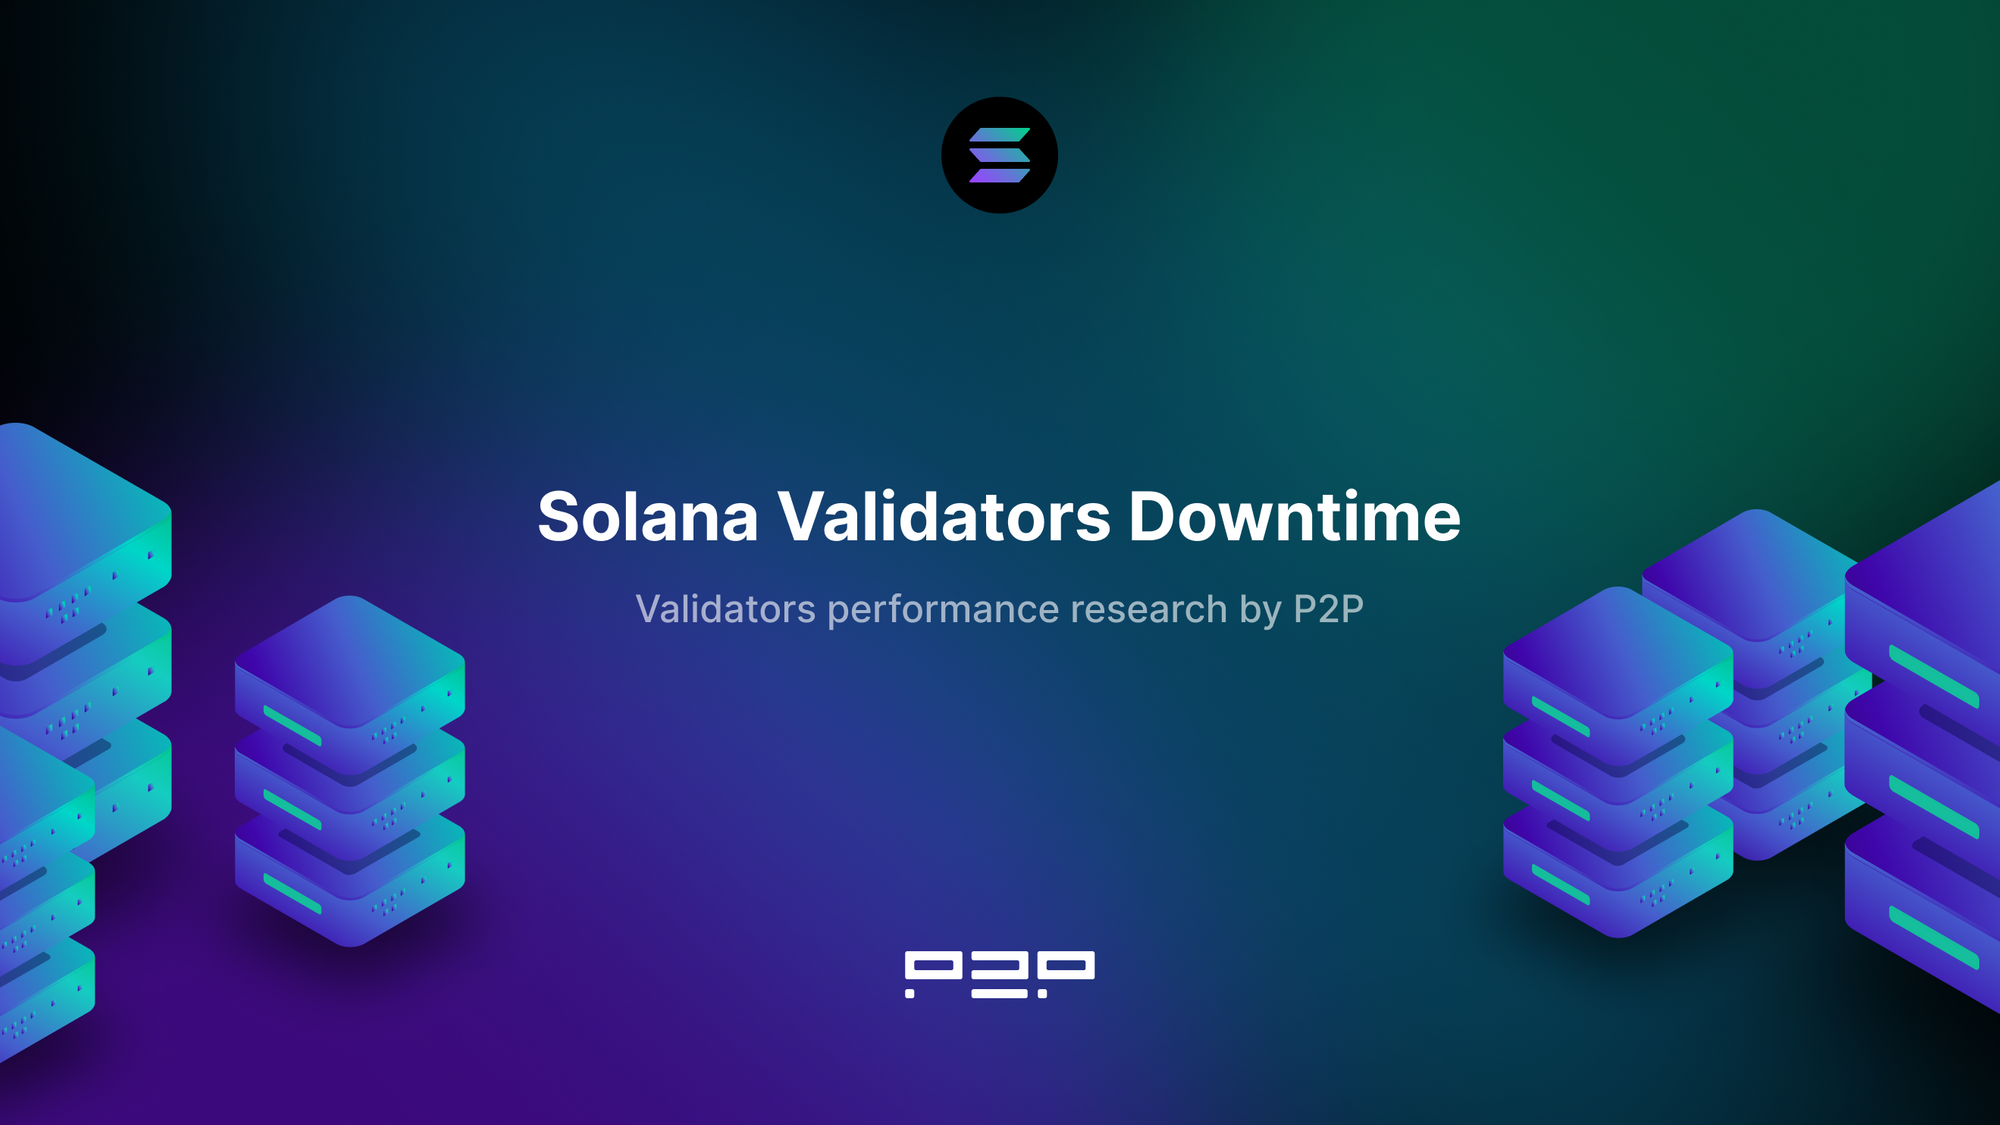 Solana Validators Performance Research, part 1: Downtime Analysis